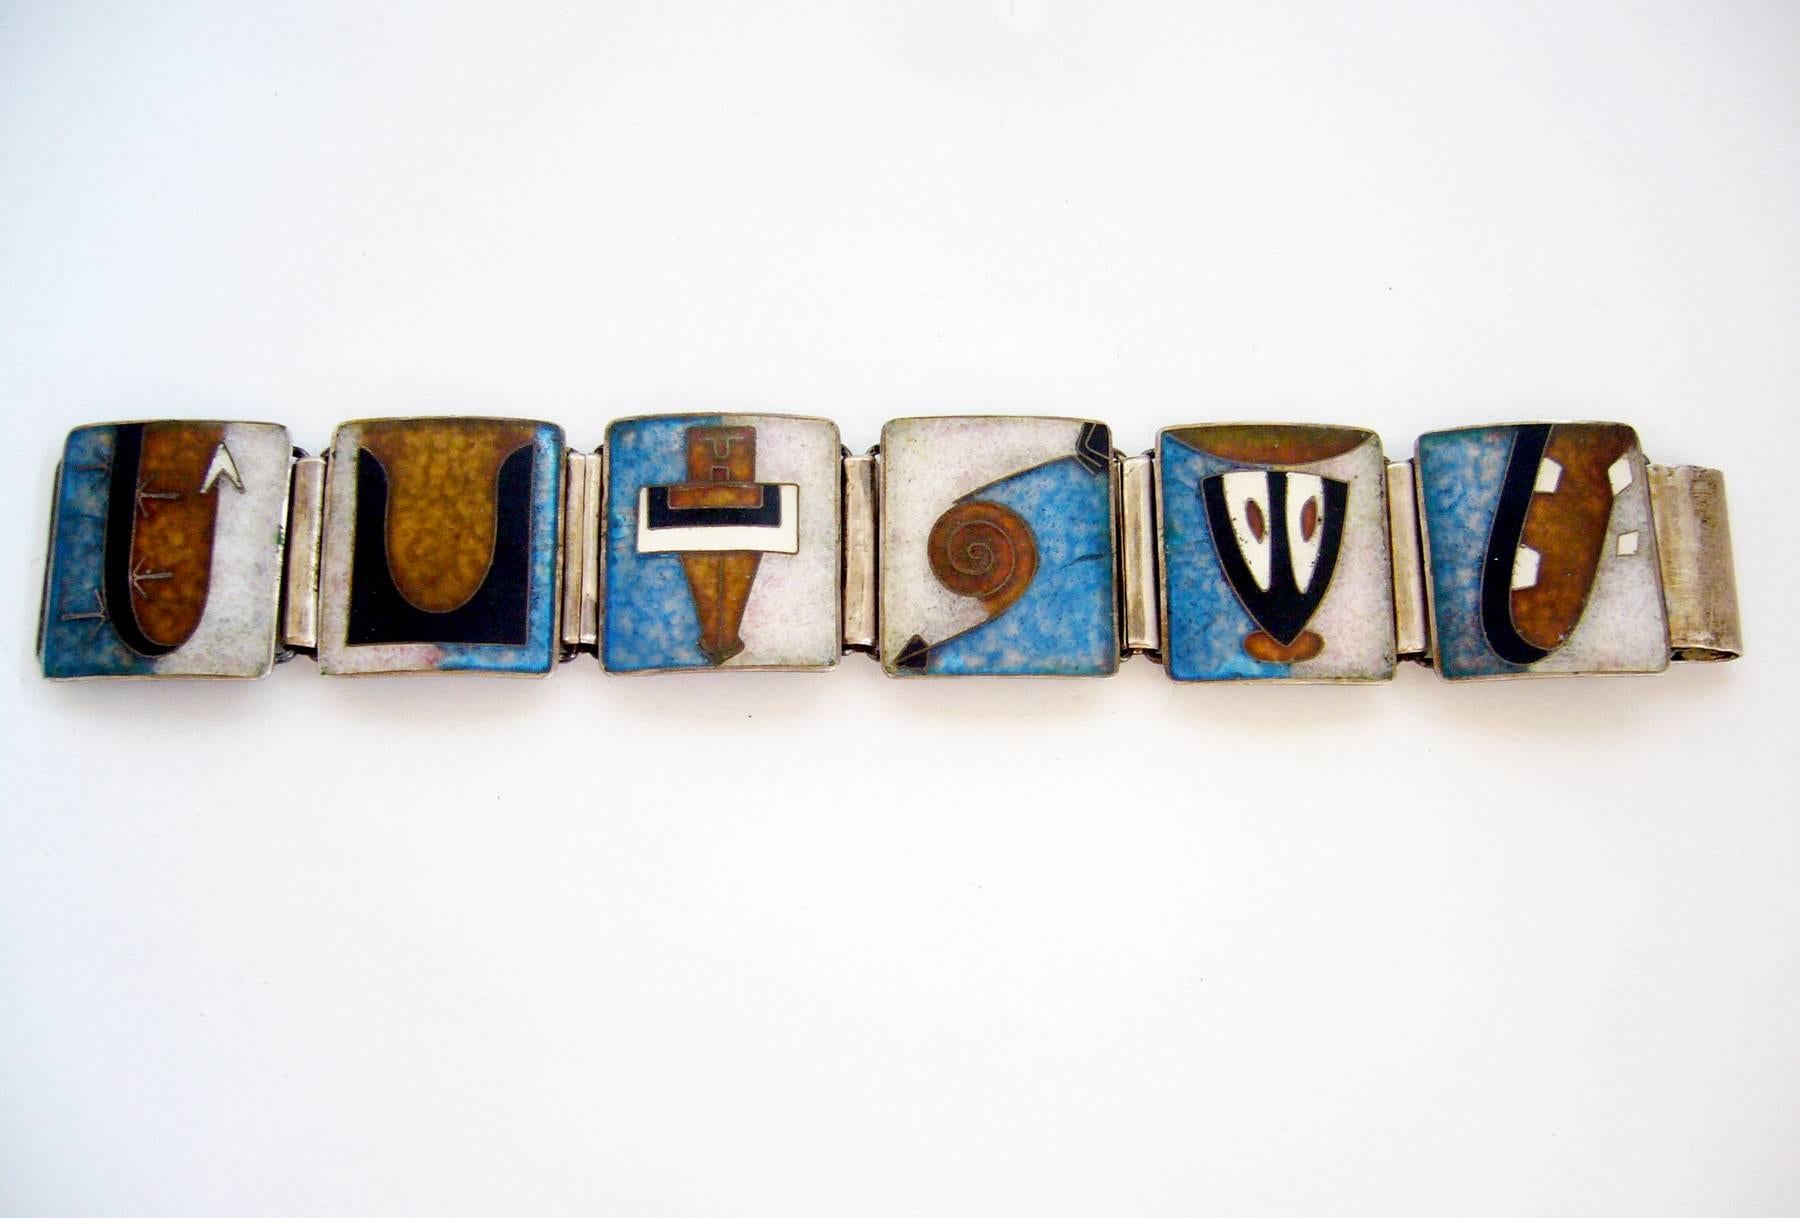 A moderne enamel over sterling linked bracelet, possibly made by Perli of Germany.  Bracelet has six counter enameled plaques that are reminiscent of Oskar Schlemmer's Bauhaus design.  Piece measures 7 1/4" long by 1 1/8" wide. Signed